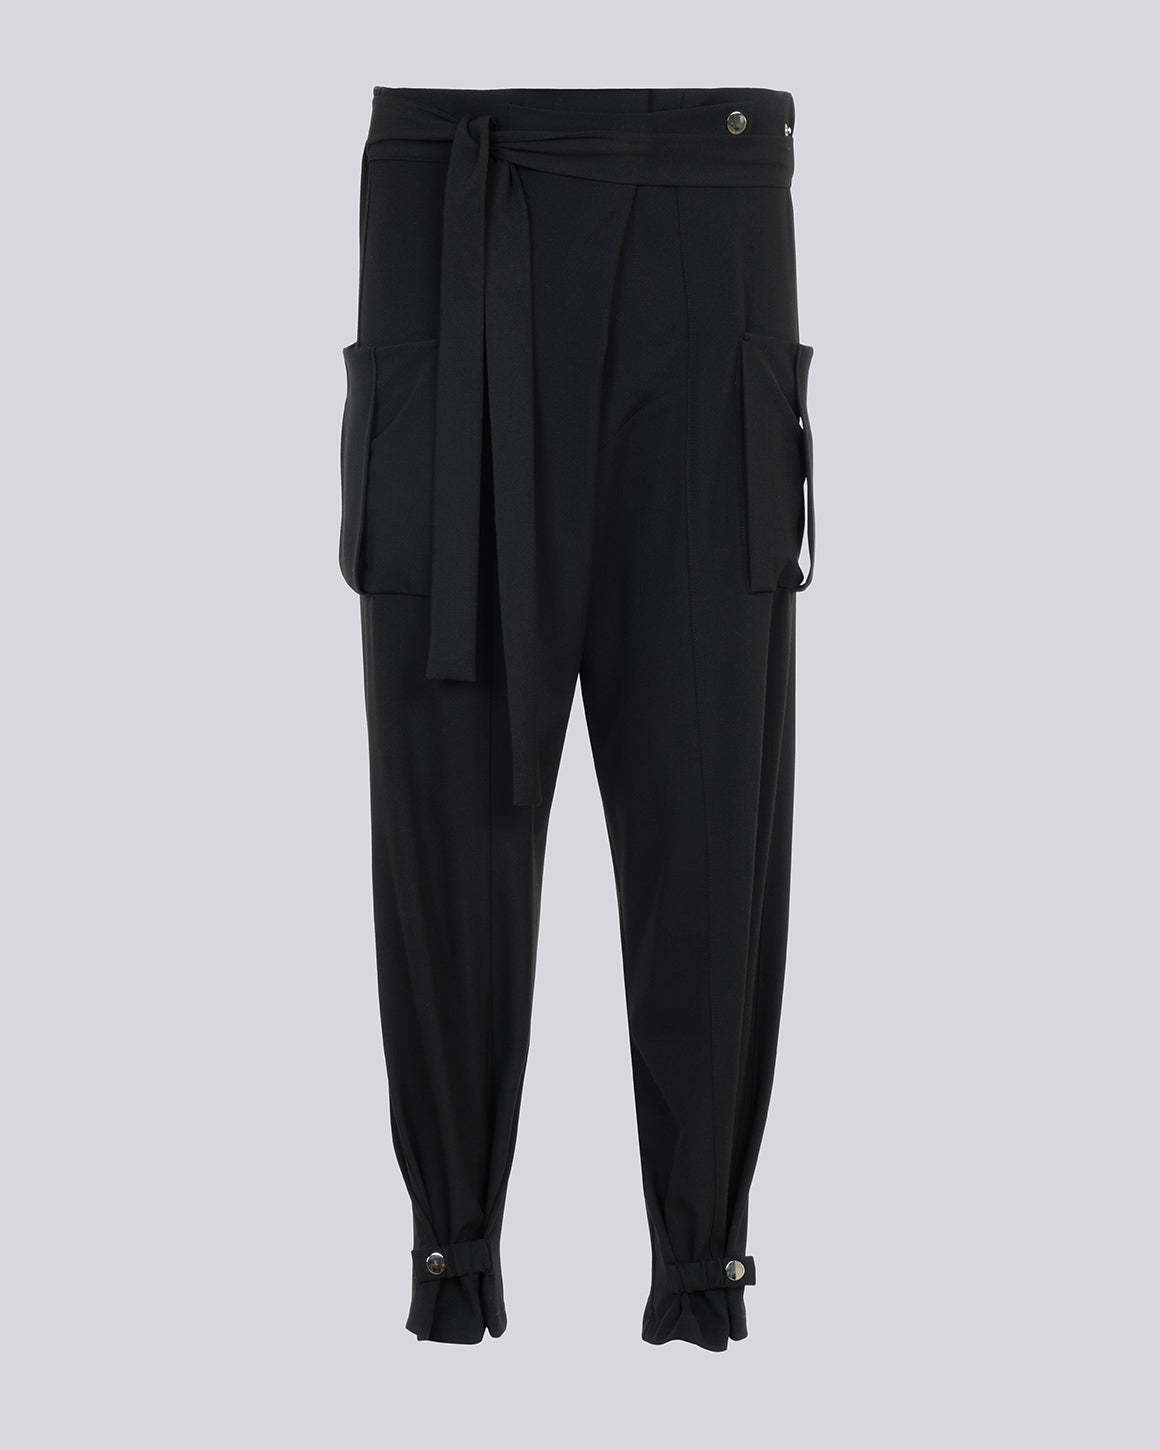 Japanese casual Cargo pants for women with a sense of small design